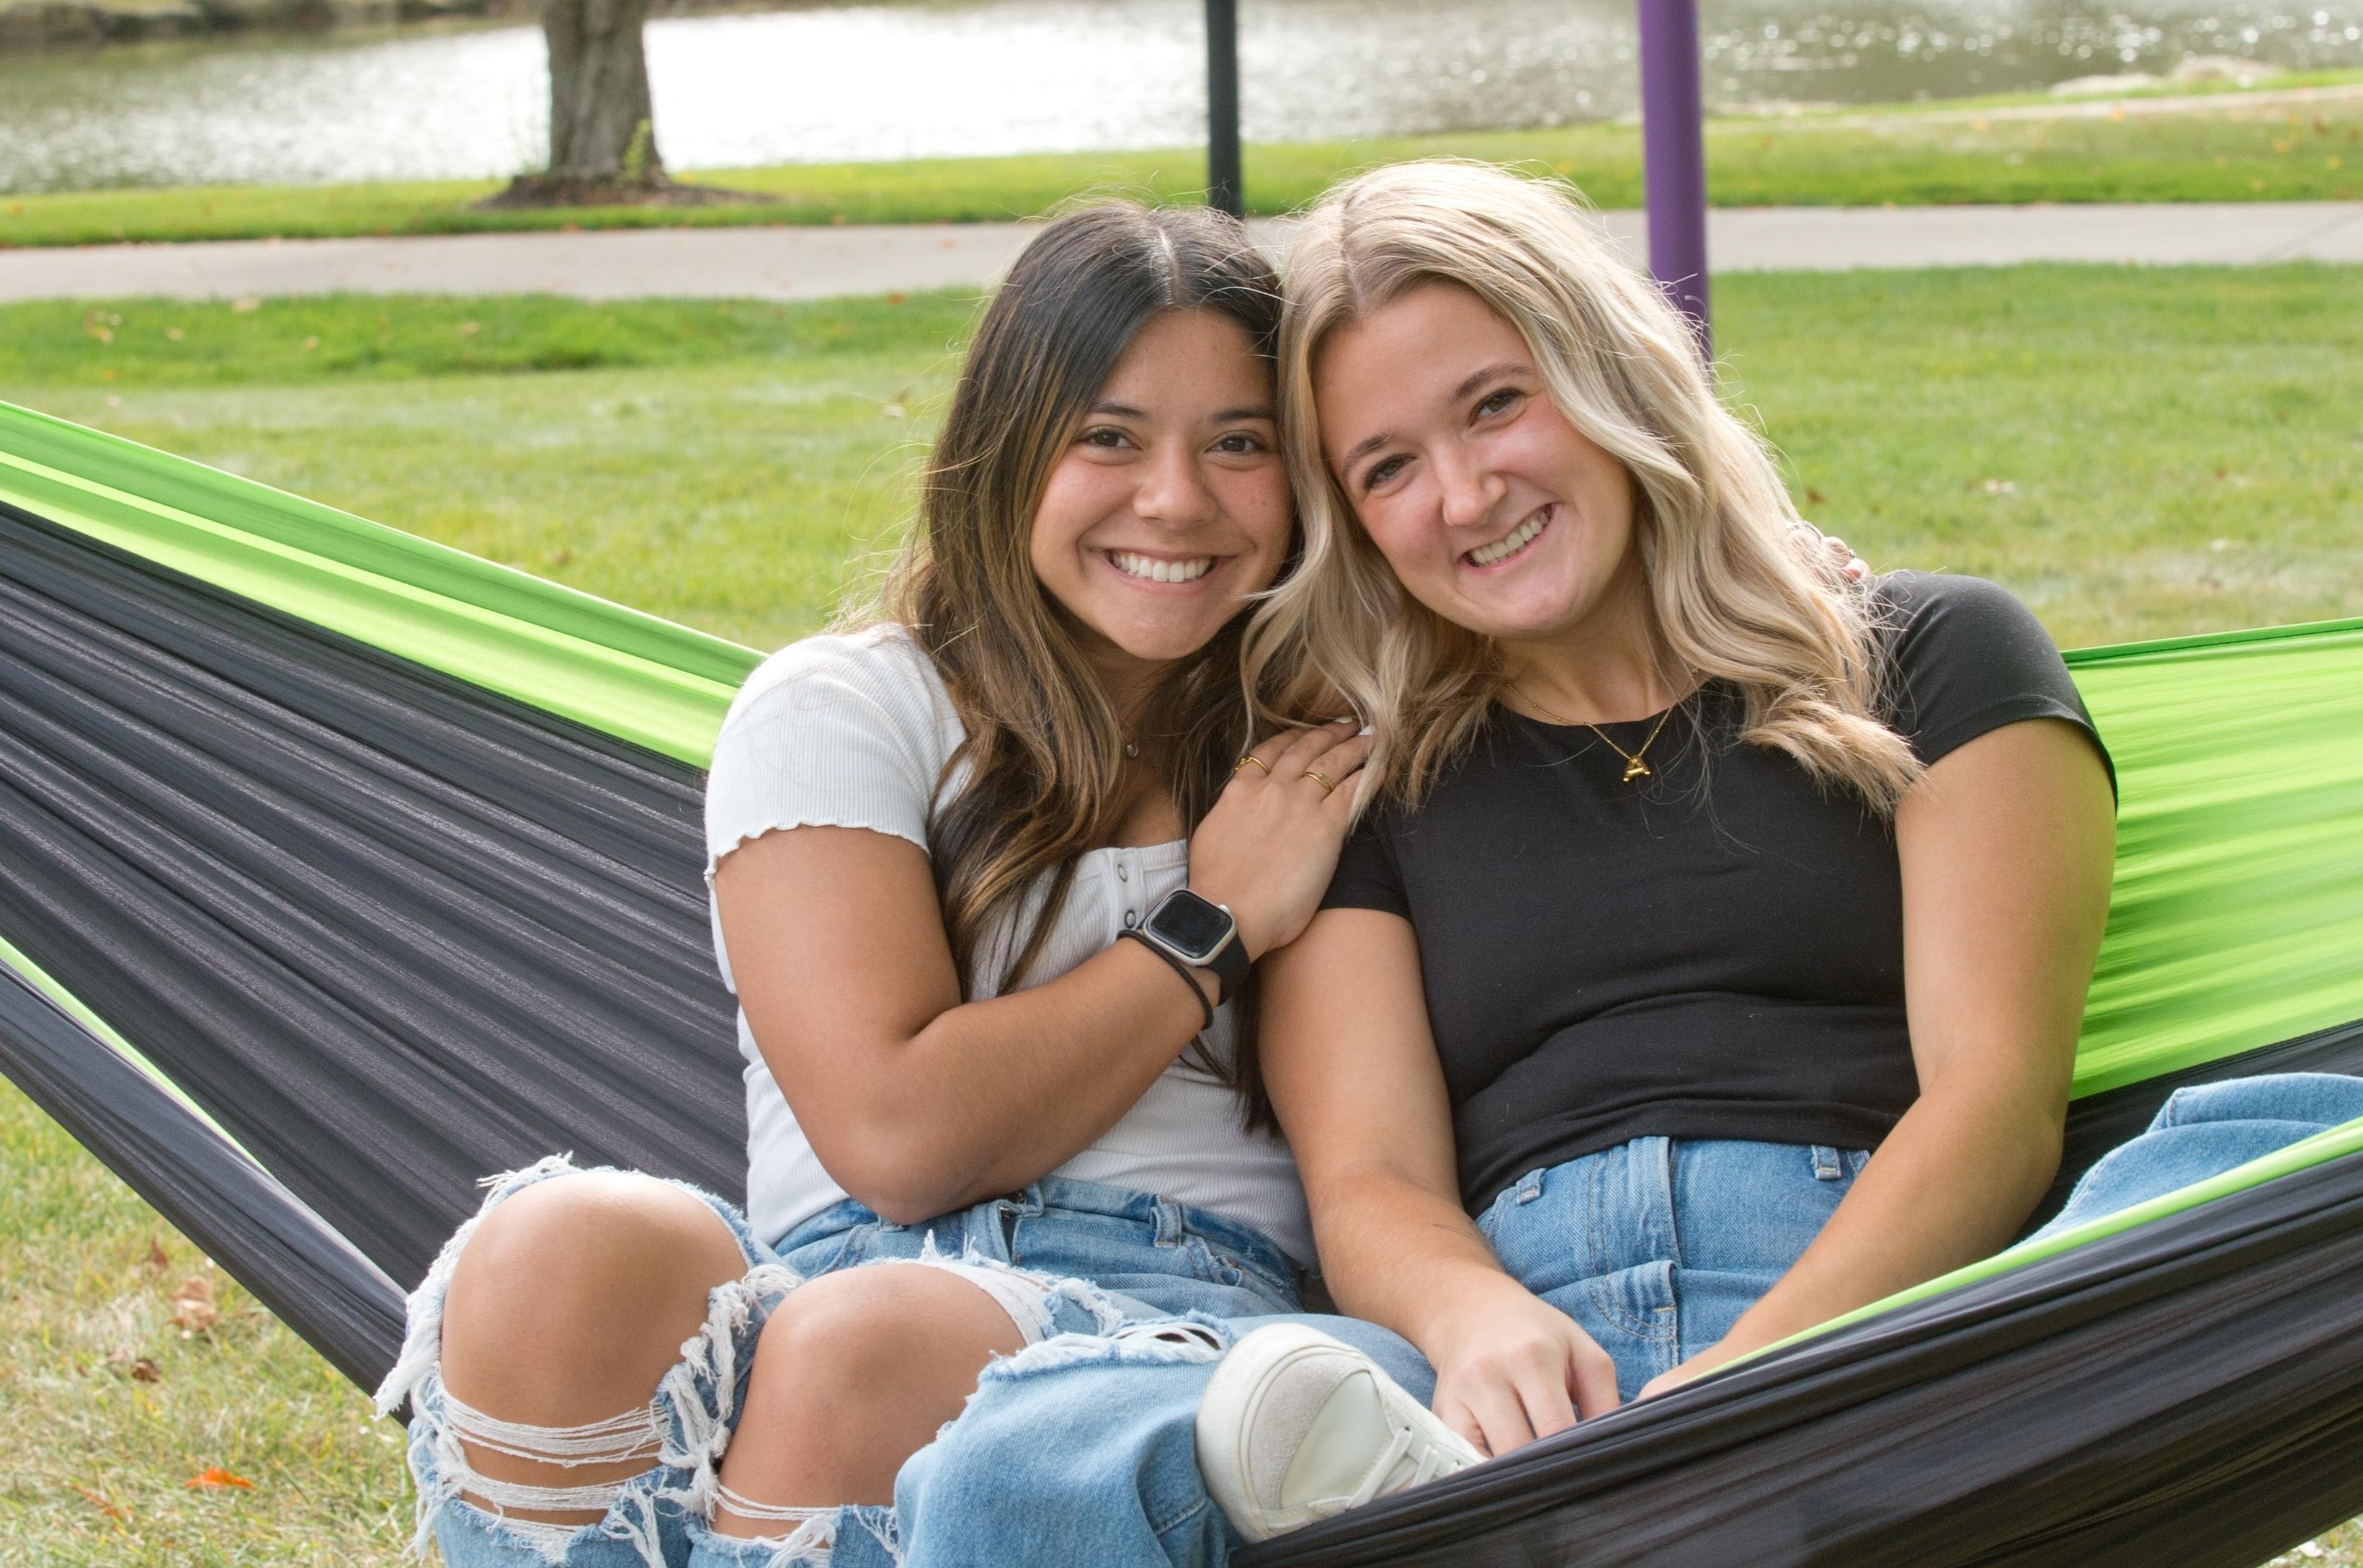 Mount Union students smiling on a hammock by 的 lakes.